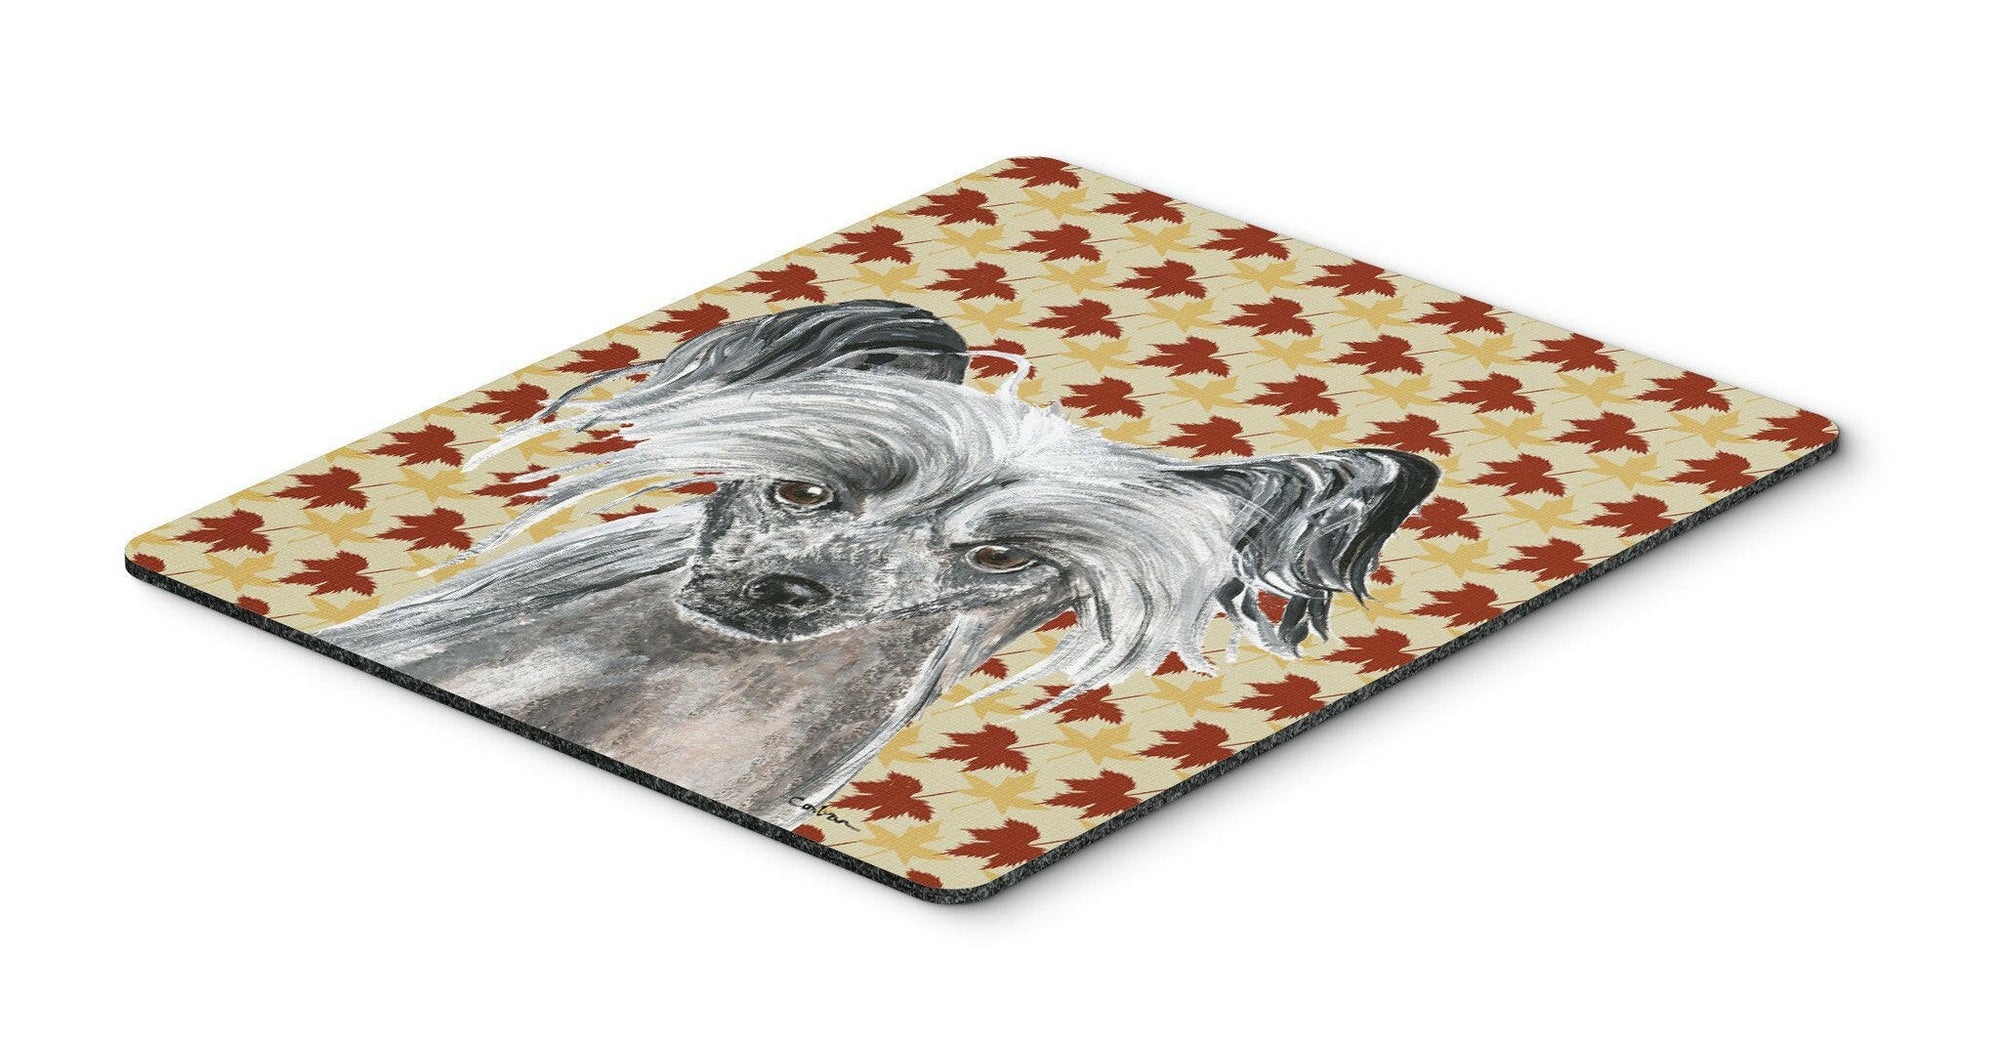 Chinese Crested Fall Leaves Mouse Pad, Hot Pad or Trivet by Caroline's Treasures